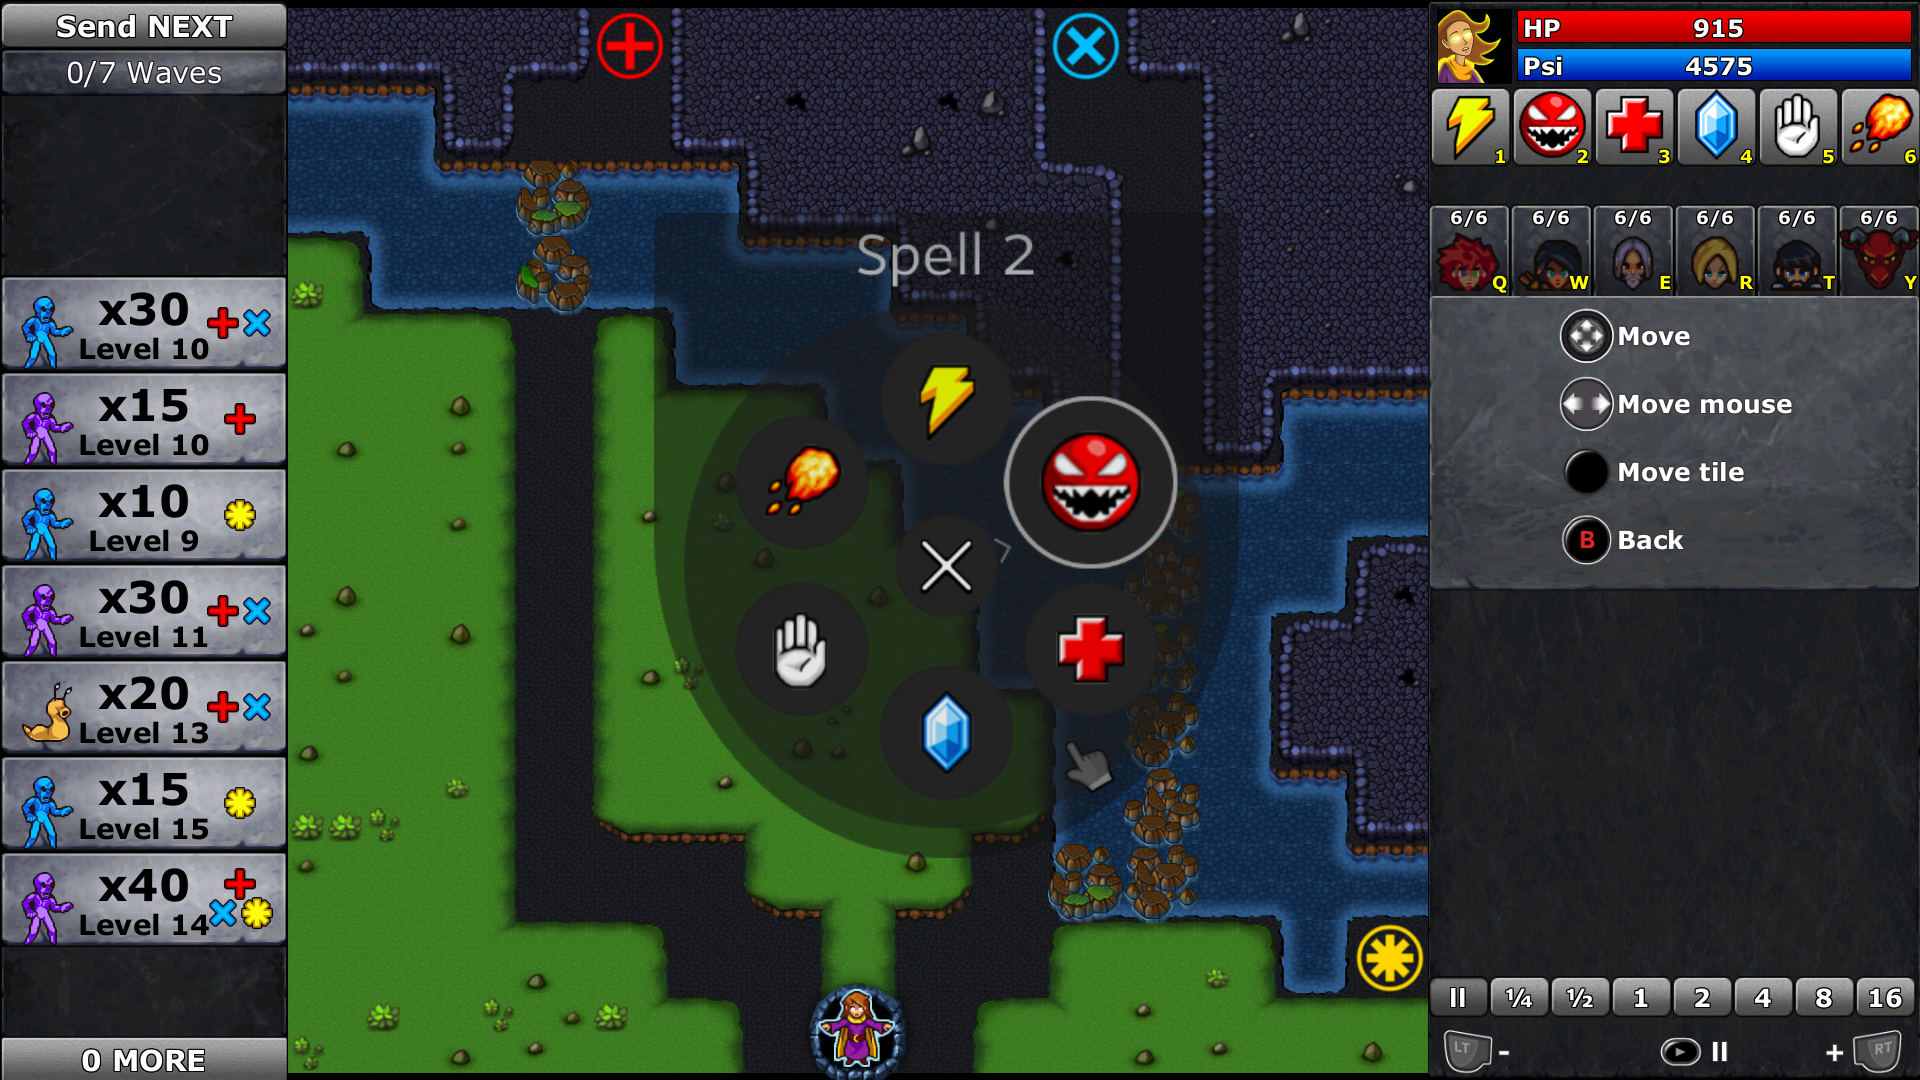 Defender's Quest -- Battle Screen w/ radial menu for spell selection